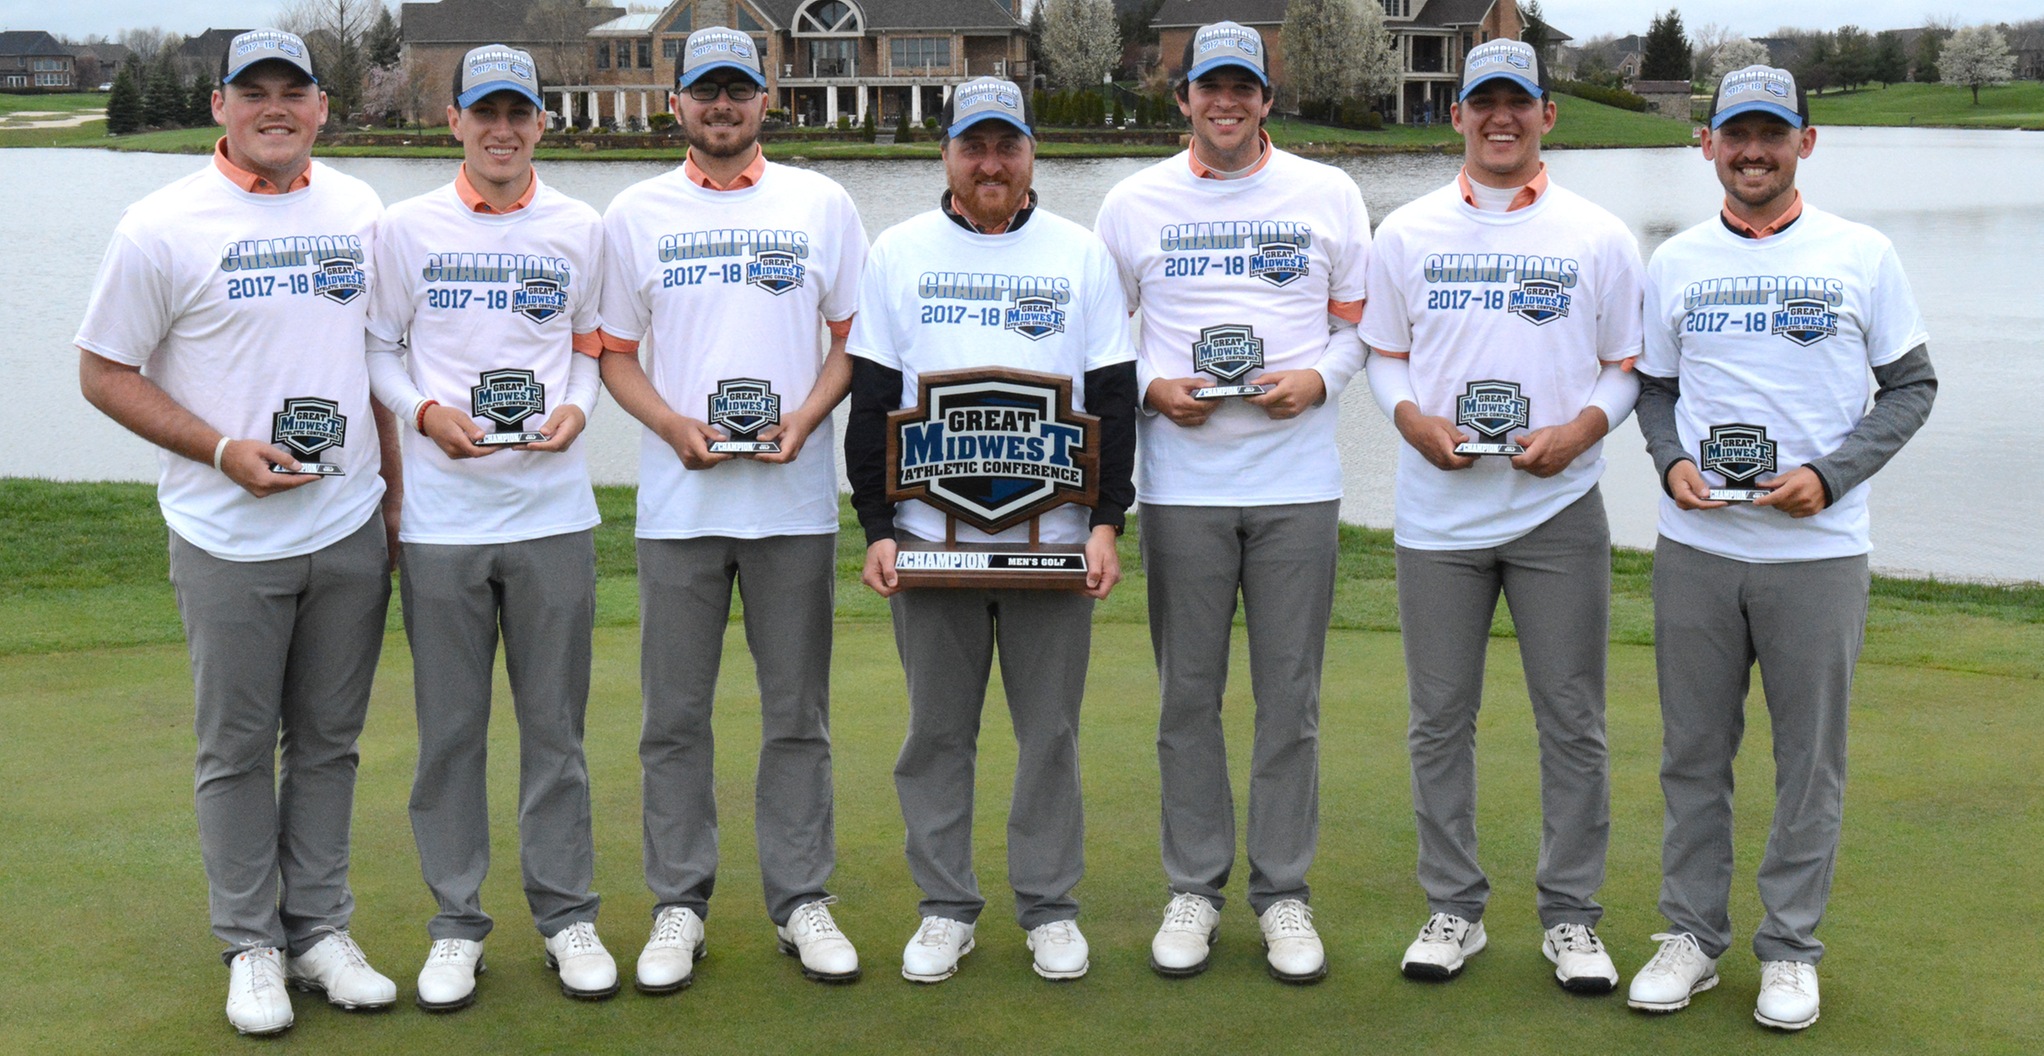 Oilers Capture Great Midwest Championship